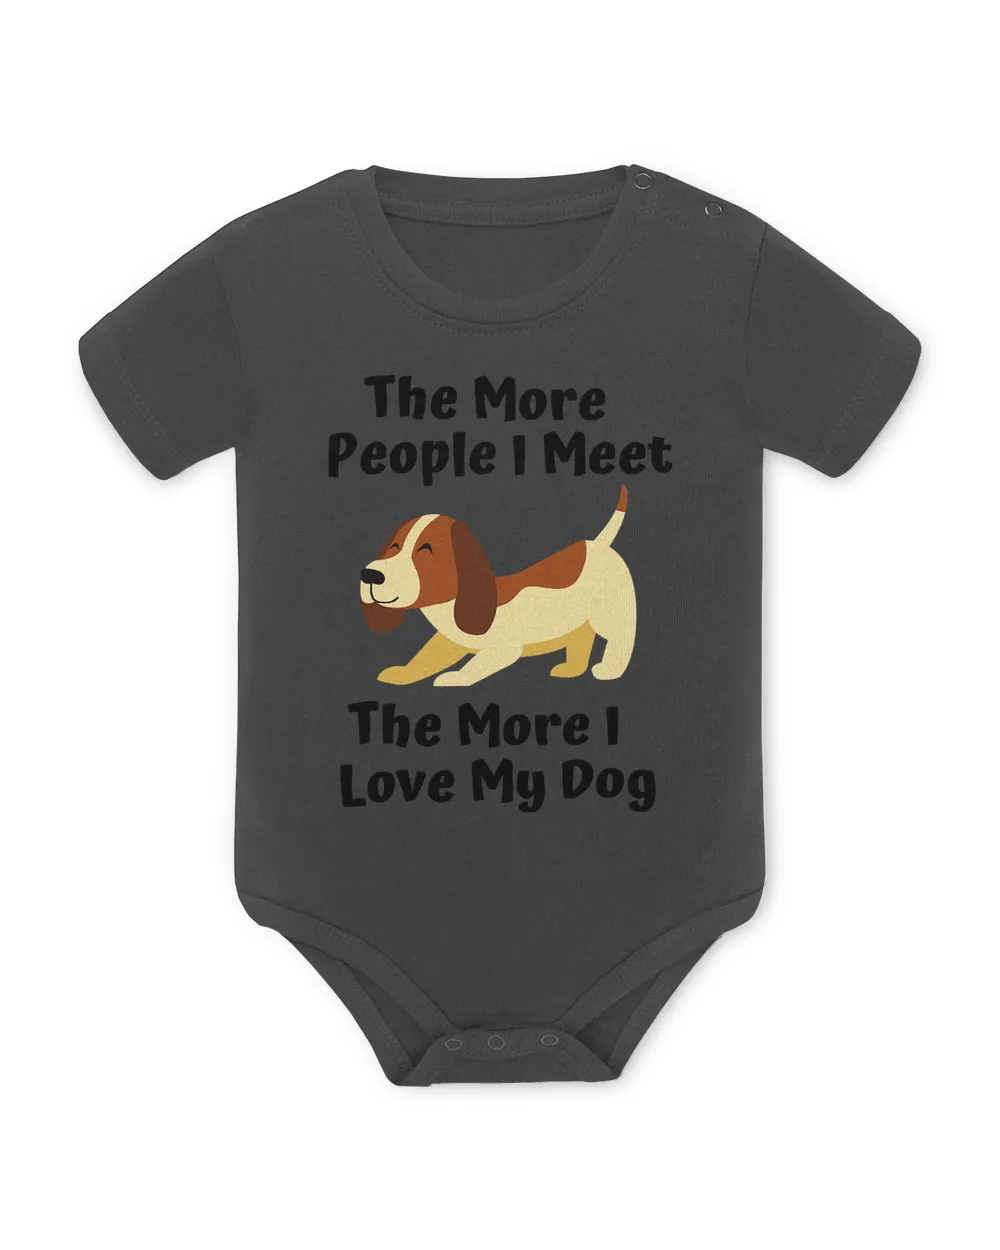 The more people I meet, the more I love my dog cute slogan T-Shirt